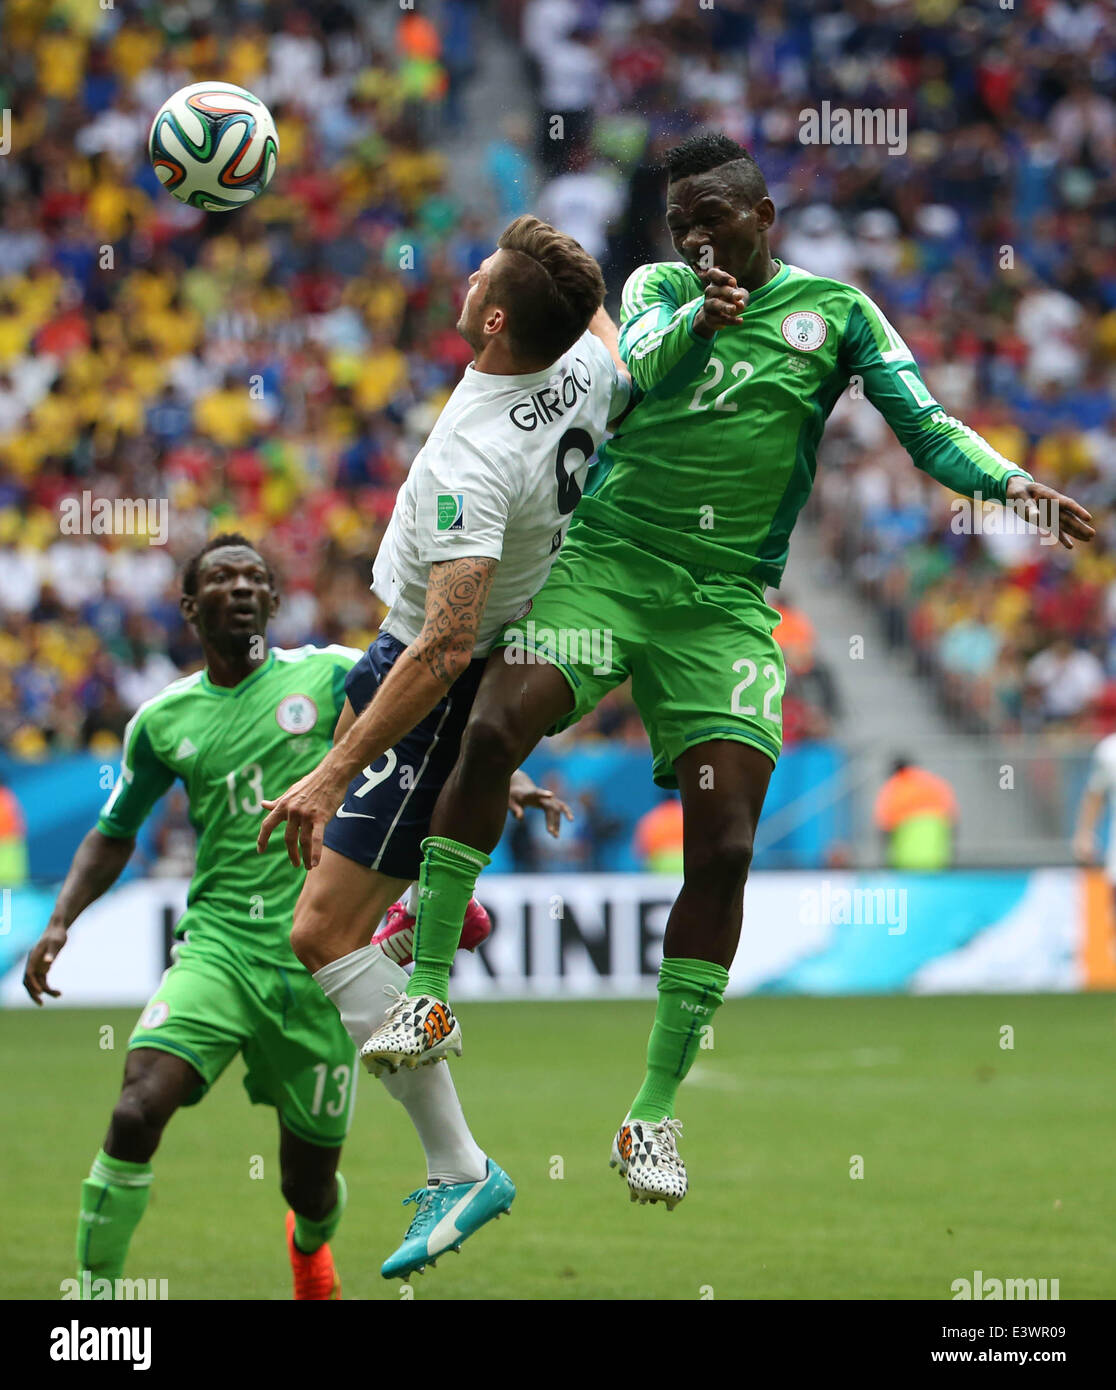 Brasilia, Brazil. 30th June, 2014. France's Olivier Giroud vies with Nigeria's Kenneth Omeruo during a Round of 16 match between France and Nigeria of 2014 FIFA World Cup at the Estadio Nacional Stadium in Brasilia, Brazil, on June 30, 2014. Credit:  Xinhua/Alamy Live News Stock Photo